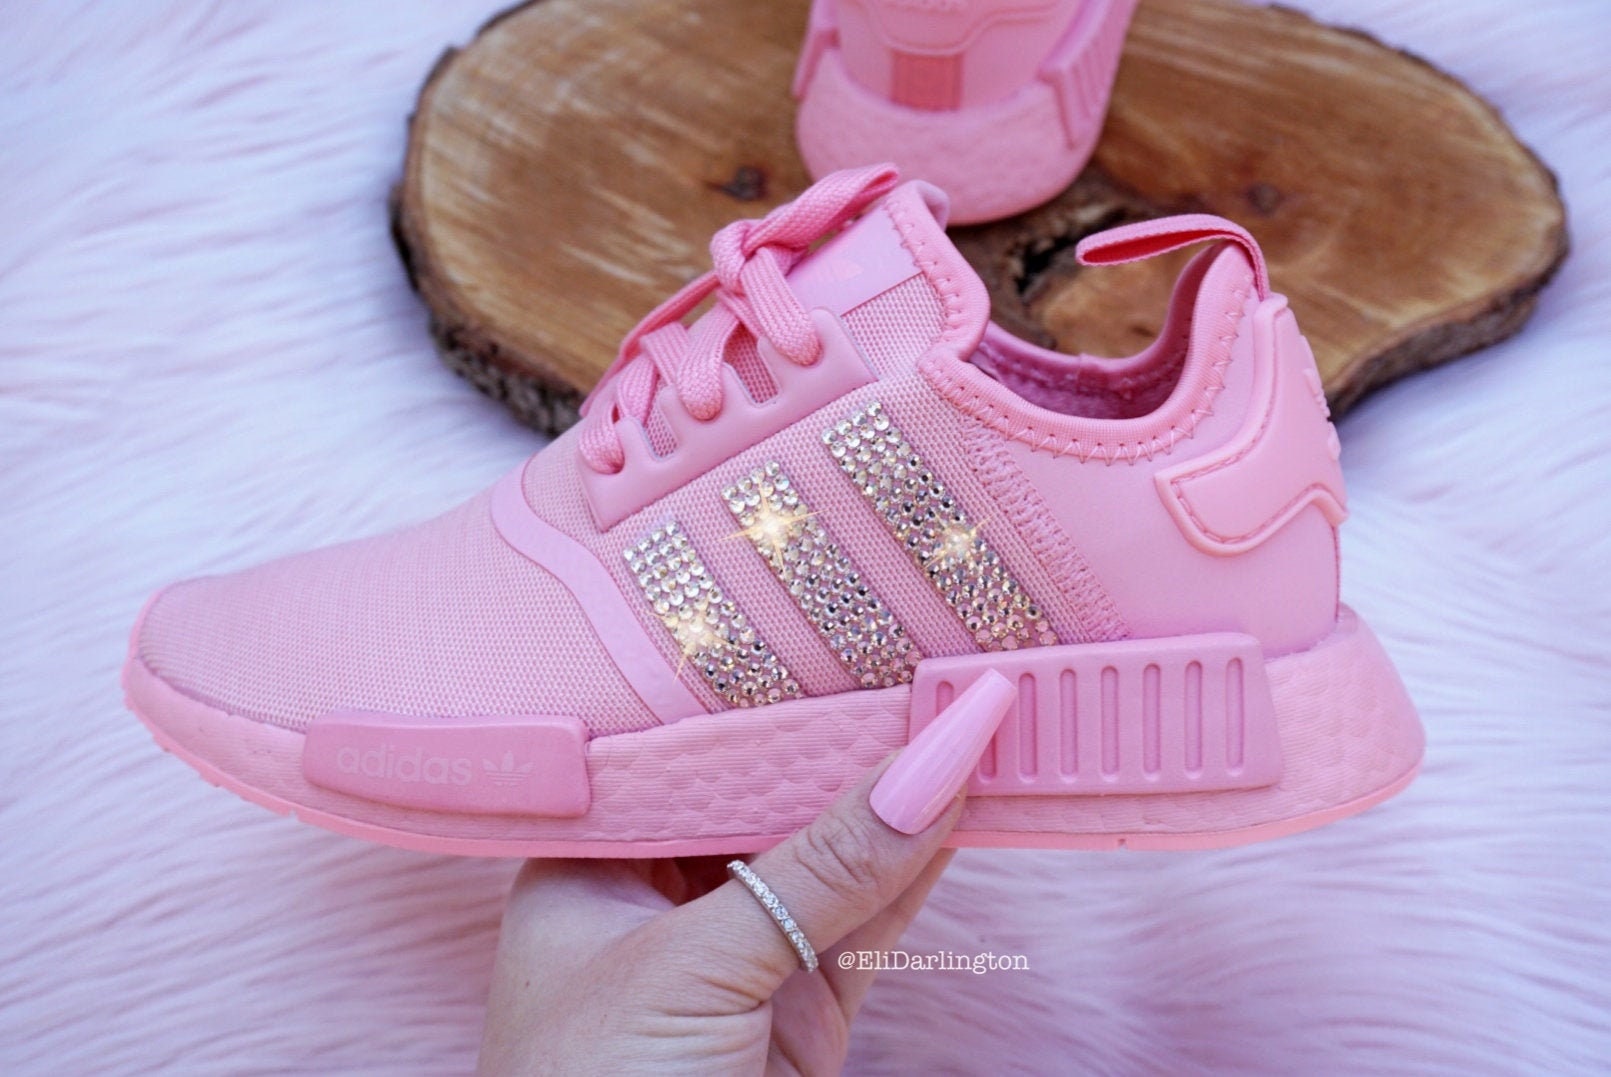 konsonant violet Underinddel Women's Youth Pink Adidas NMD Shoes With Rose Gold - Etsy